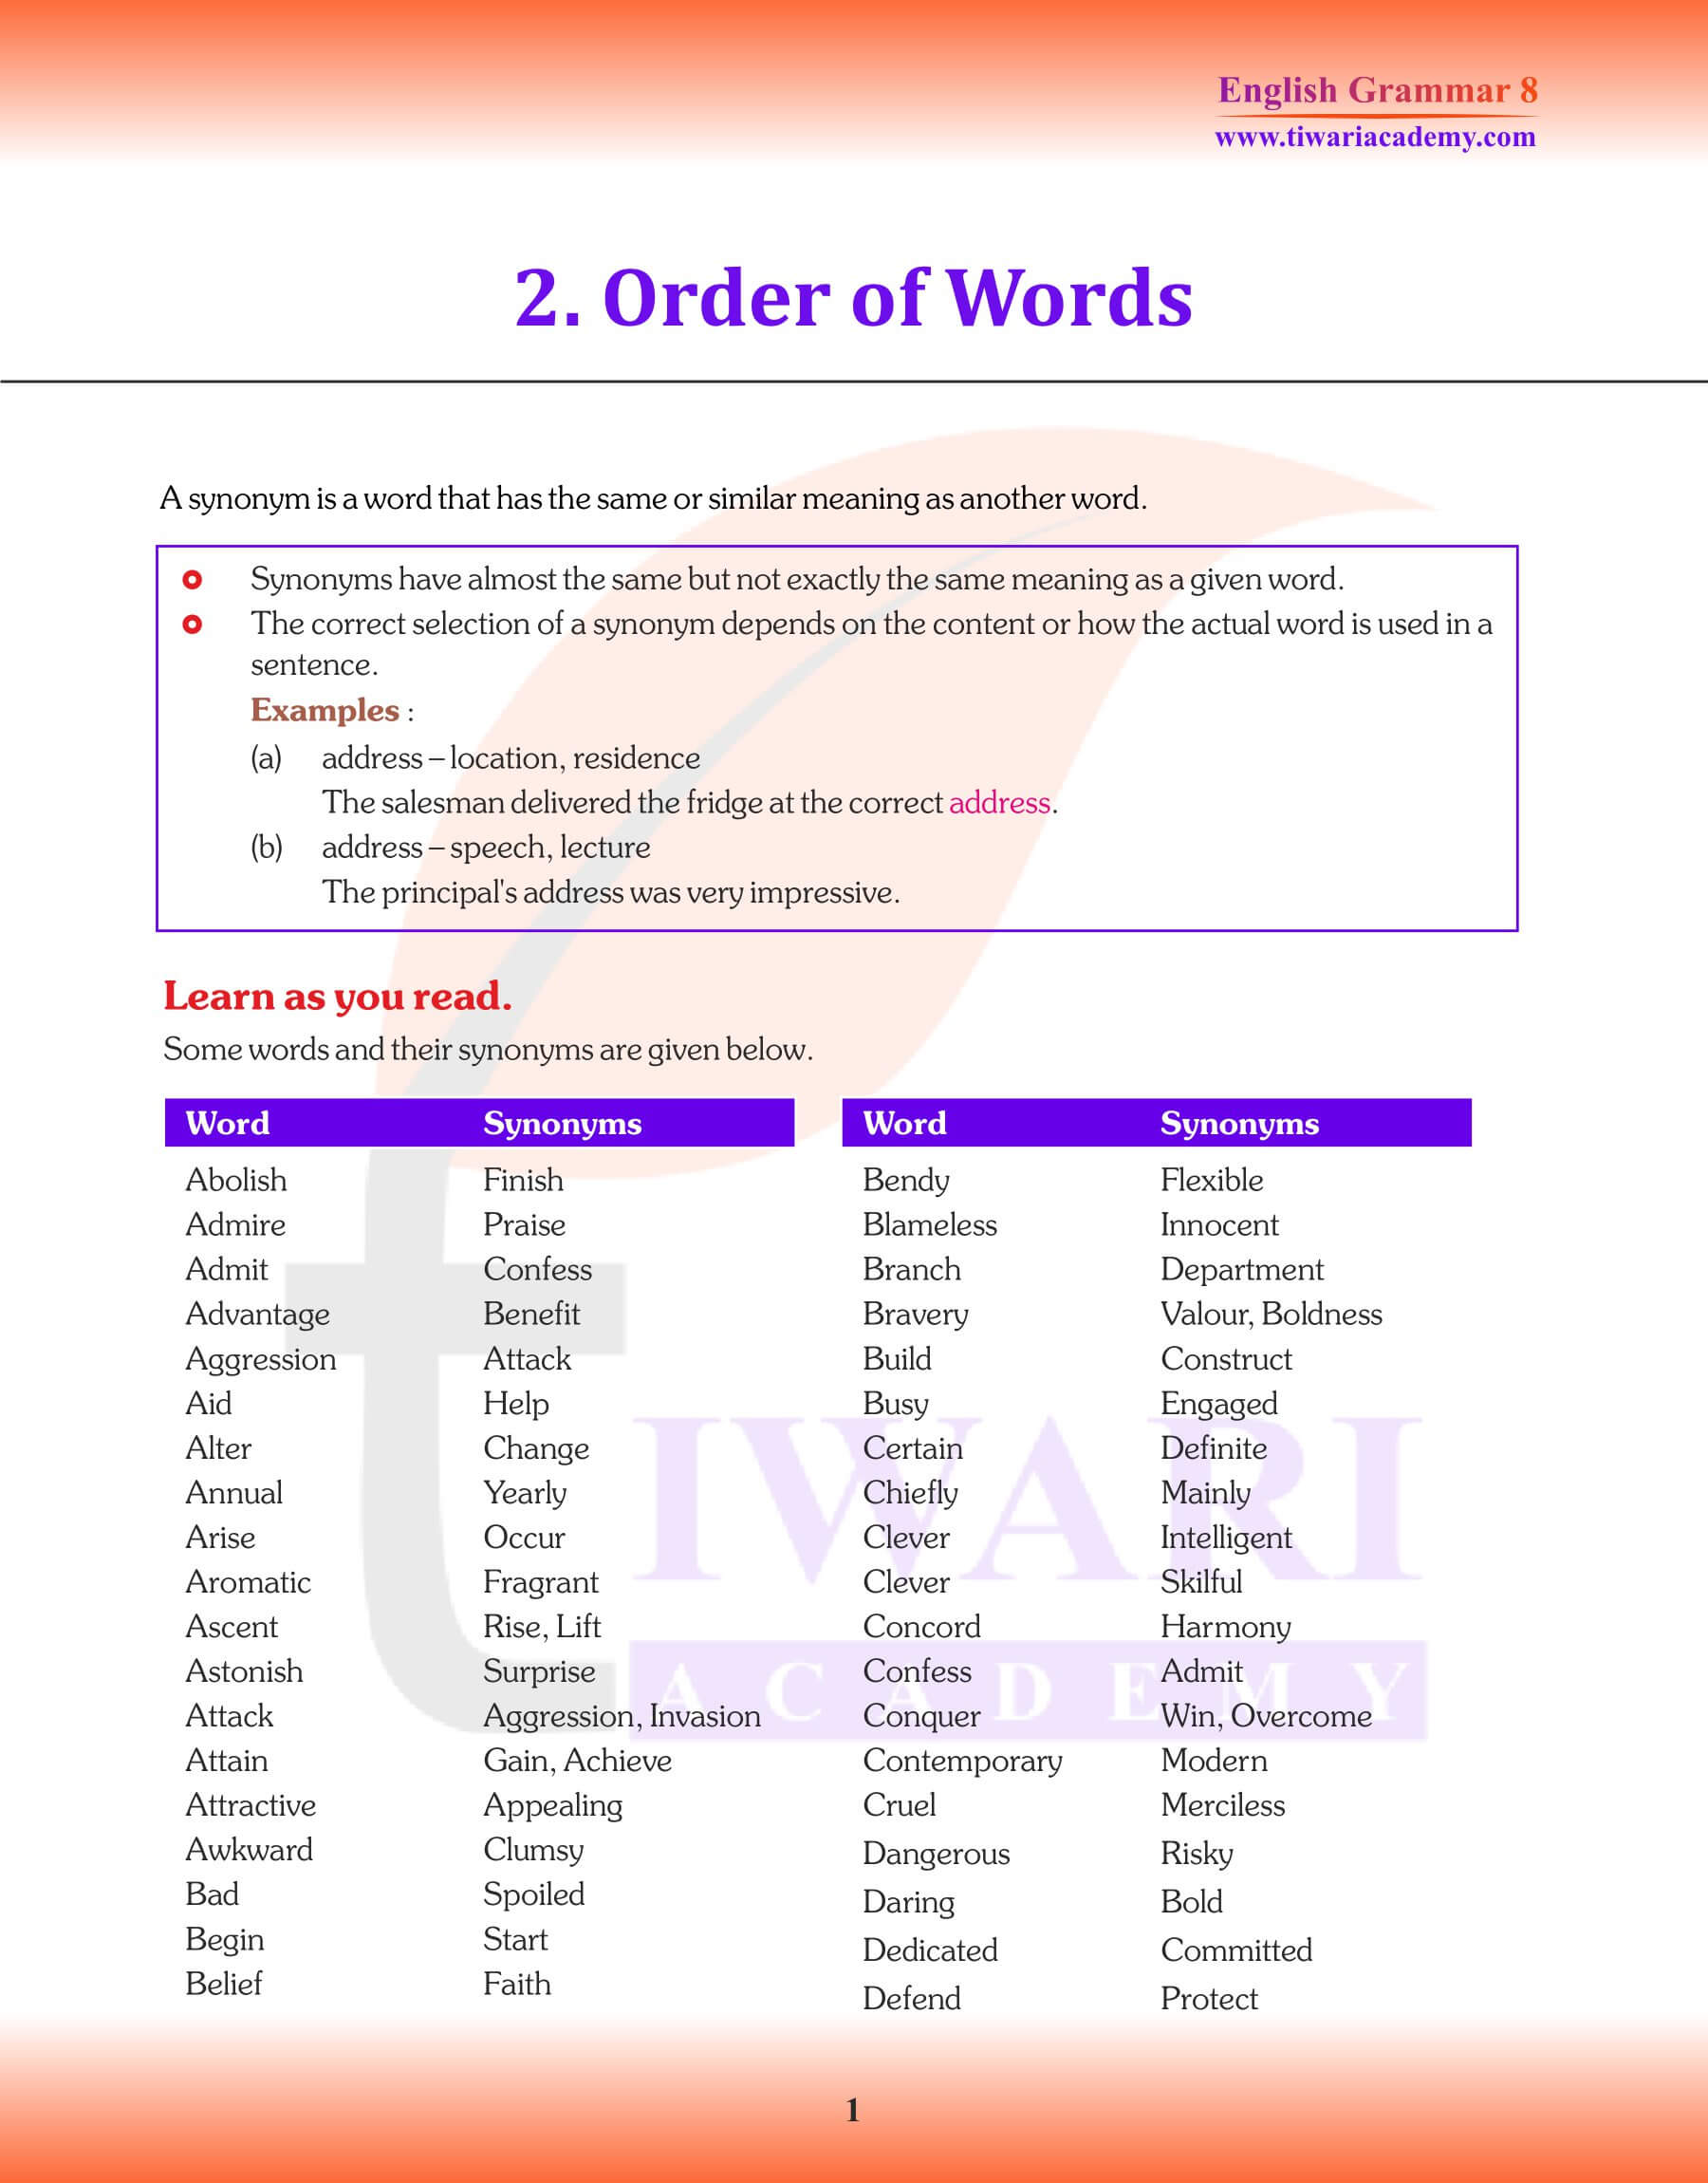 Class 8 Grammar Order of Words Revision Book